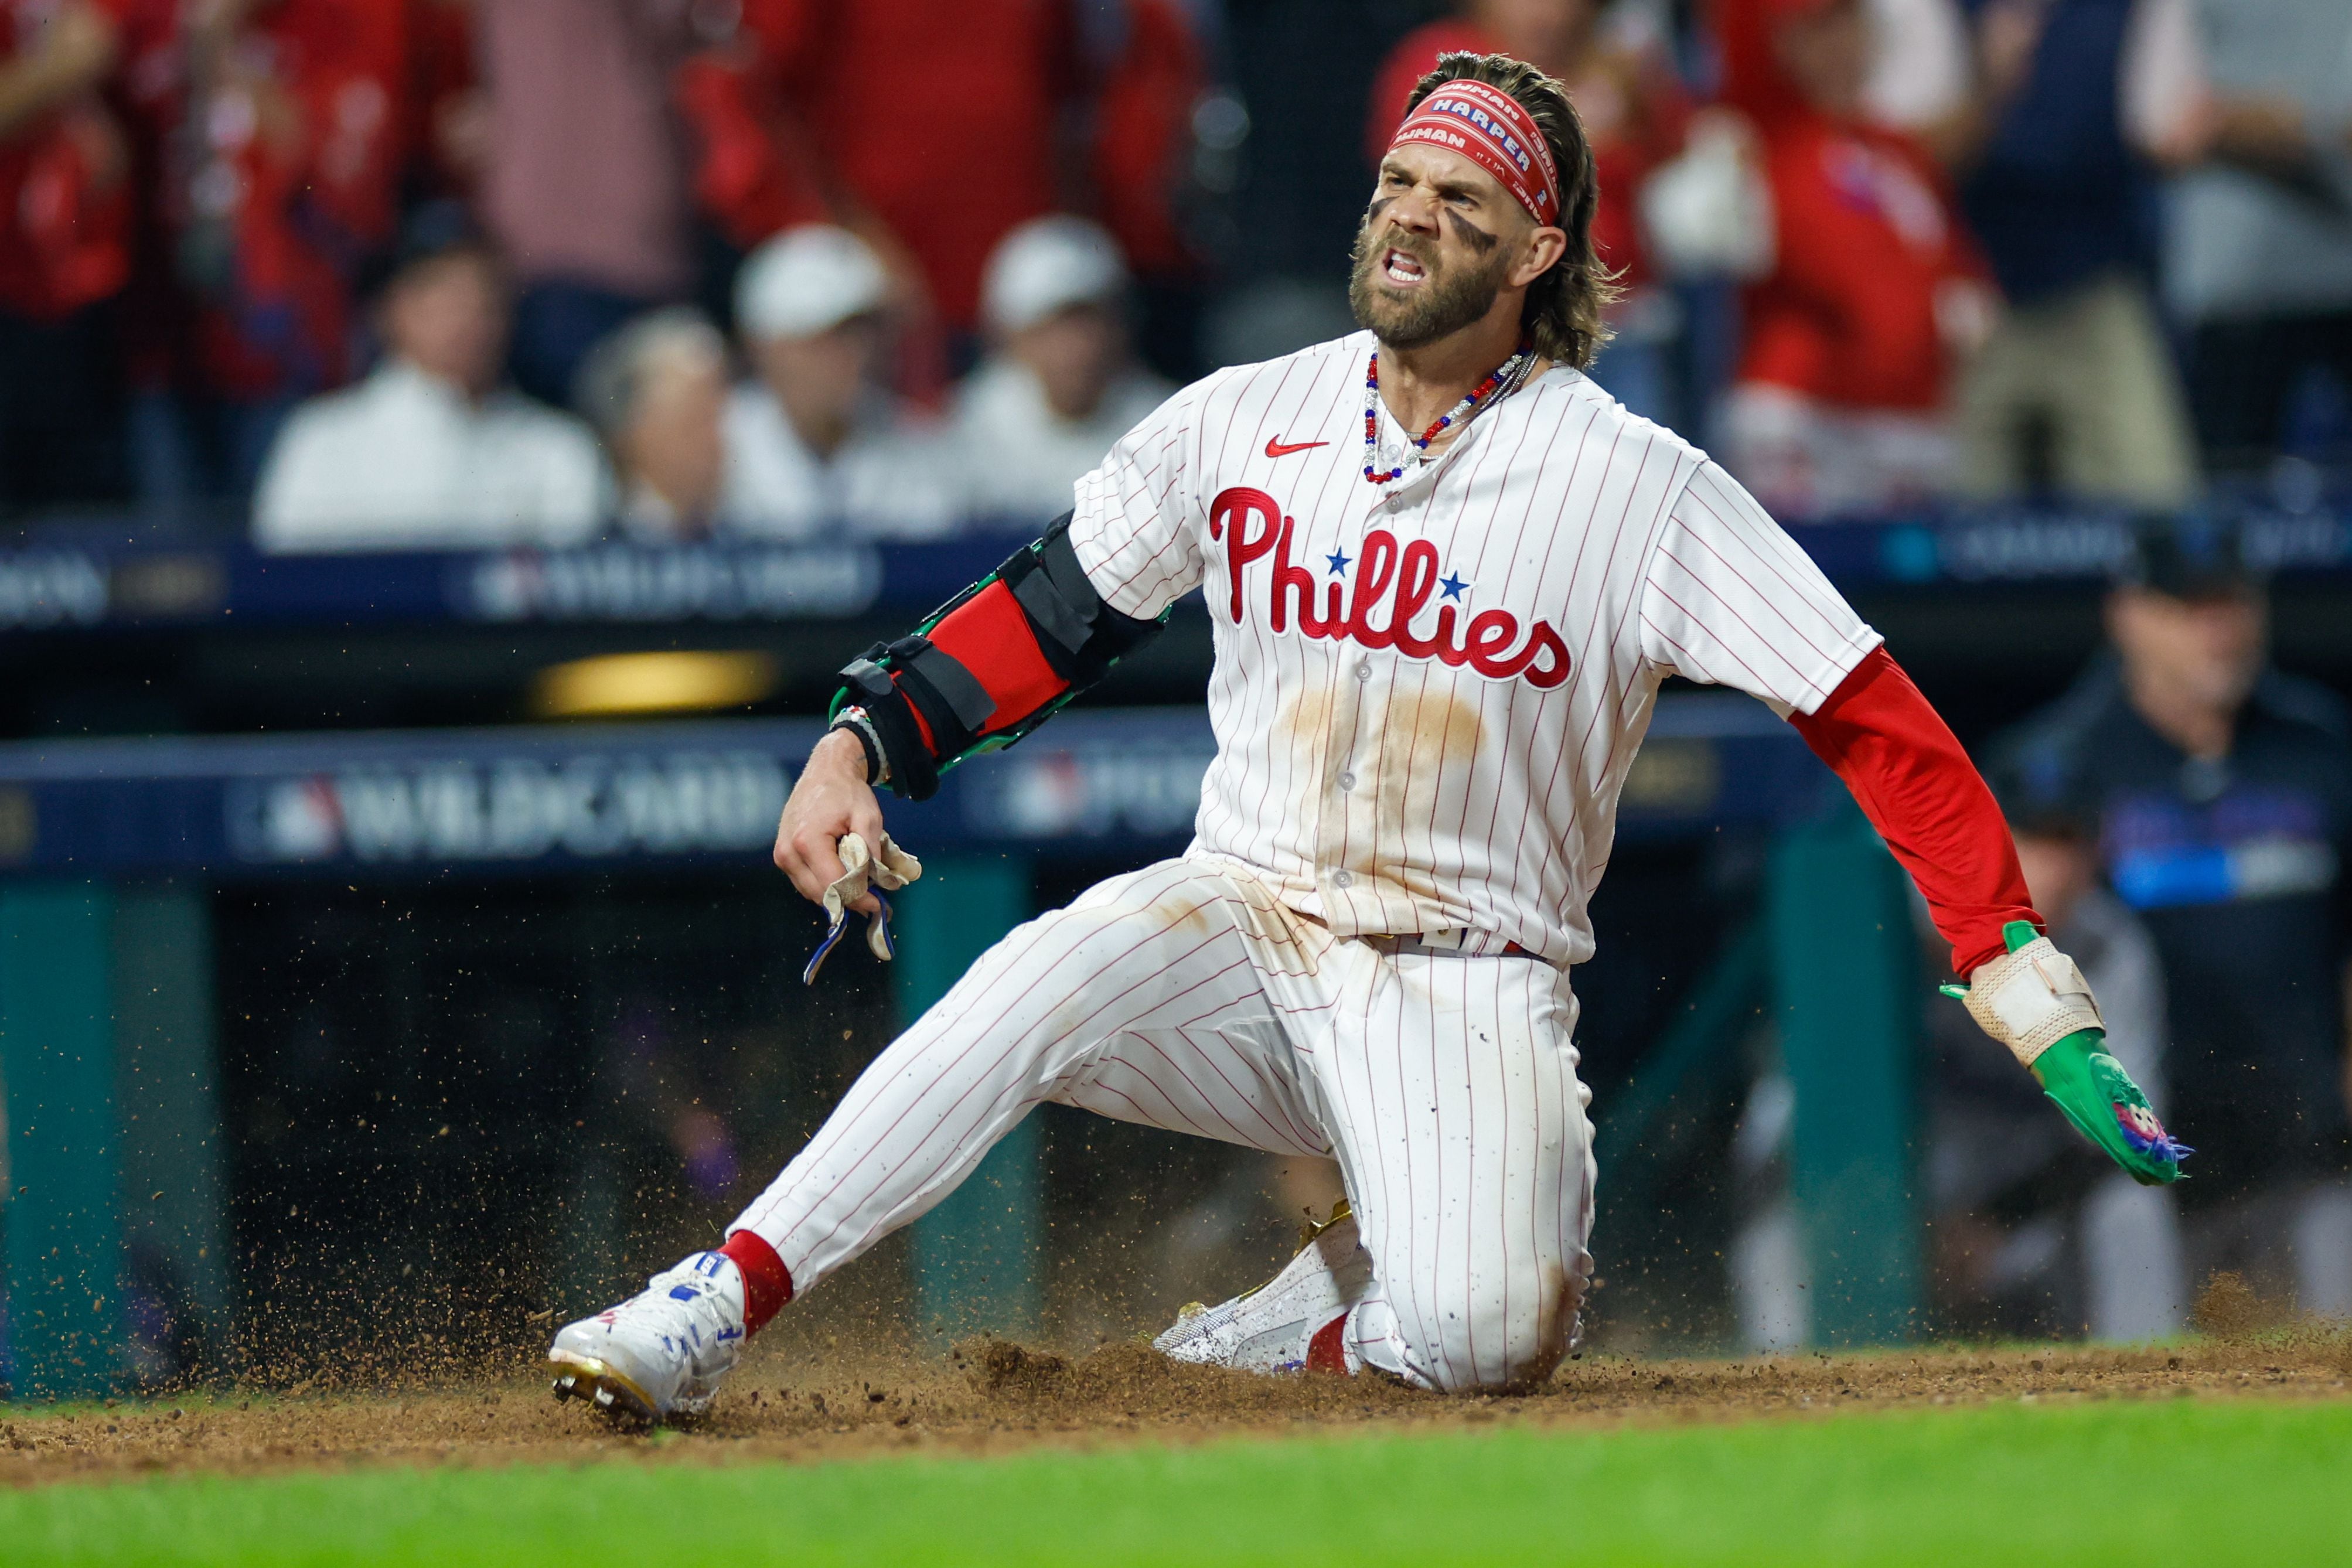 Phillies-Marlins Game 2: Start time, channel, how to watch and